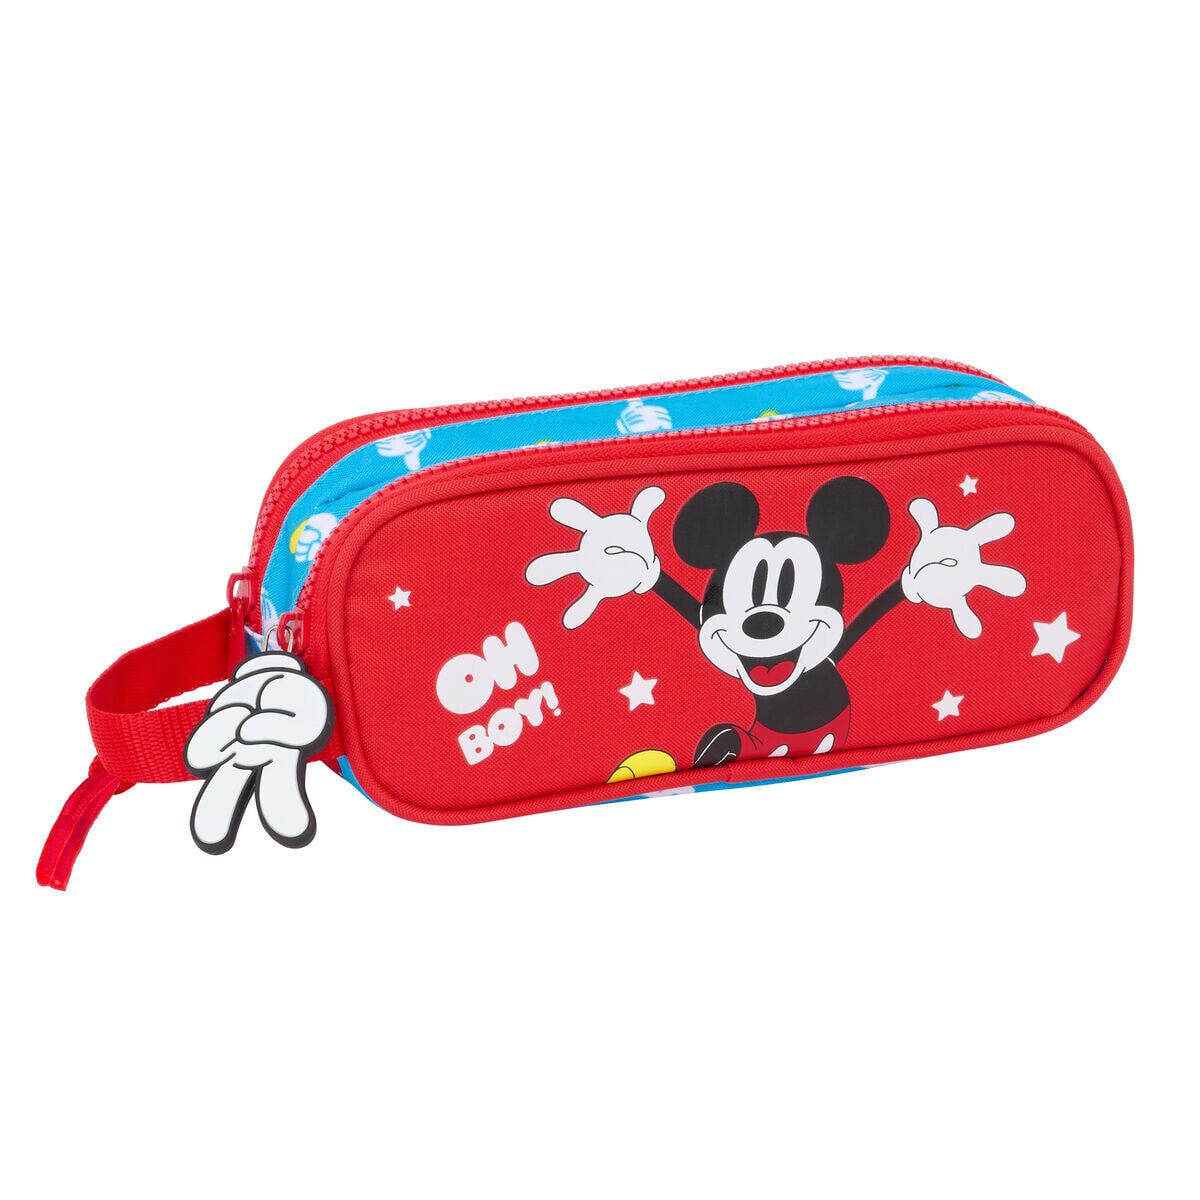 Double Carry-all Mickey Mouse Clubhouse Fantastic Blue Red 21 x 8 x 6 cm